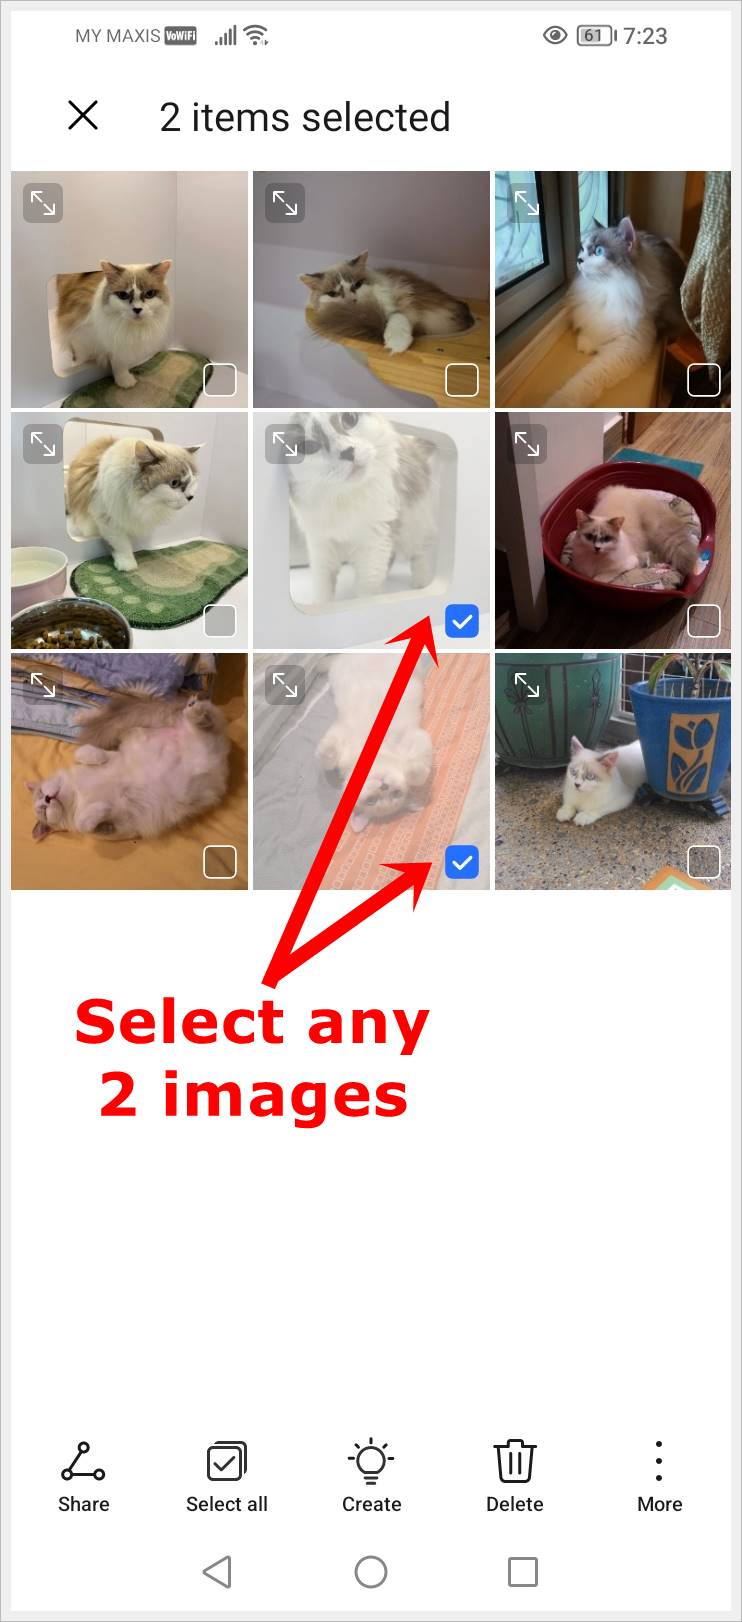 This image shows a screenshot of photos saved in the 'Gallery' of an Android phone. Two photos are highlighted indicating they are selected to be merged.